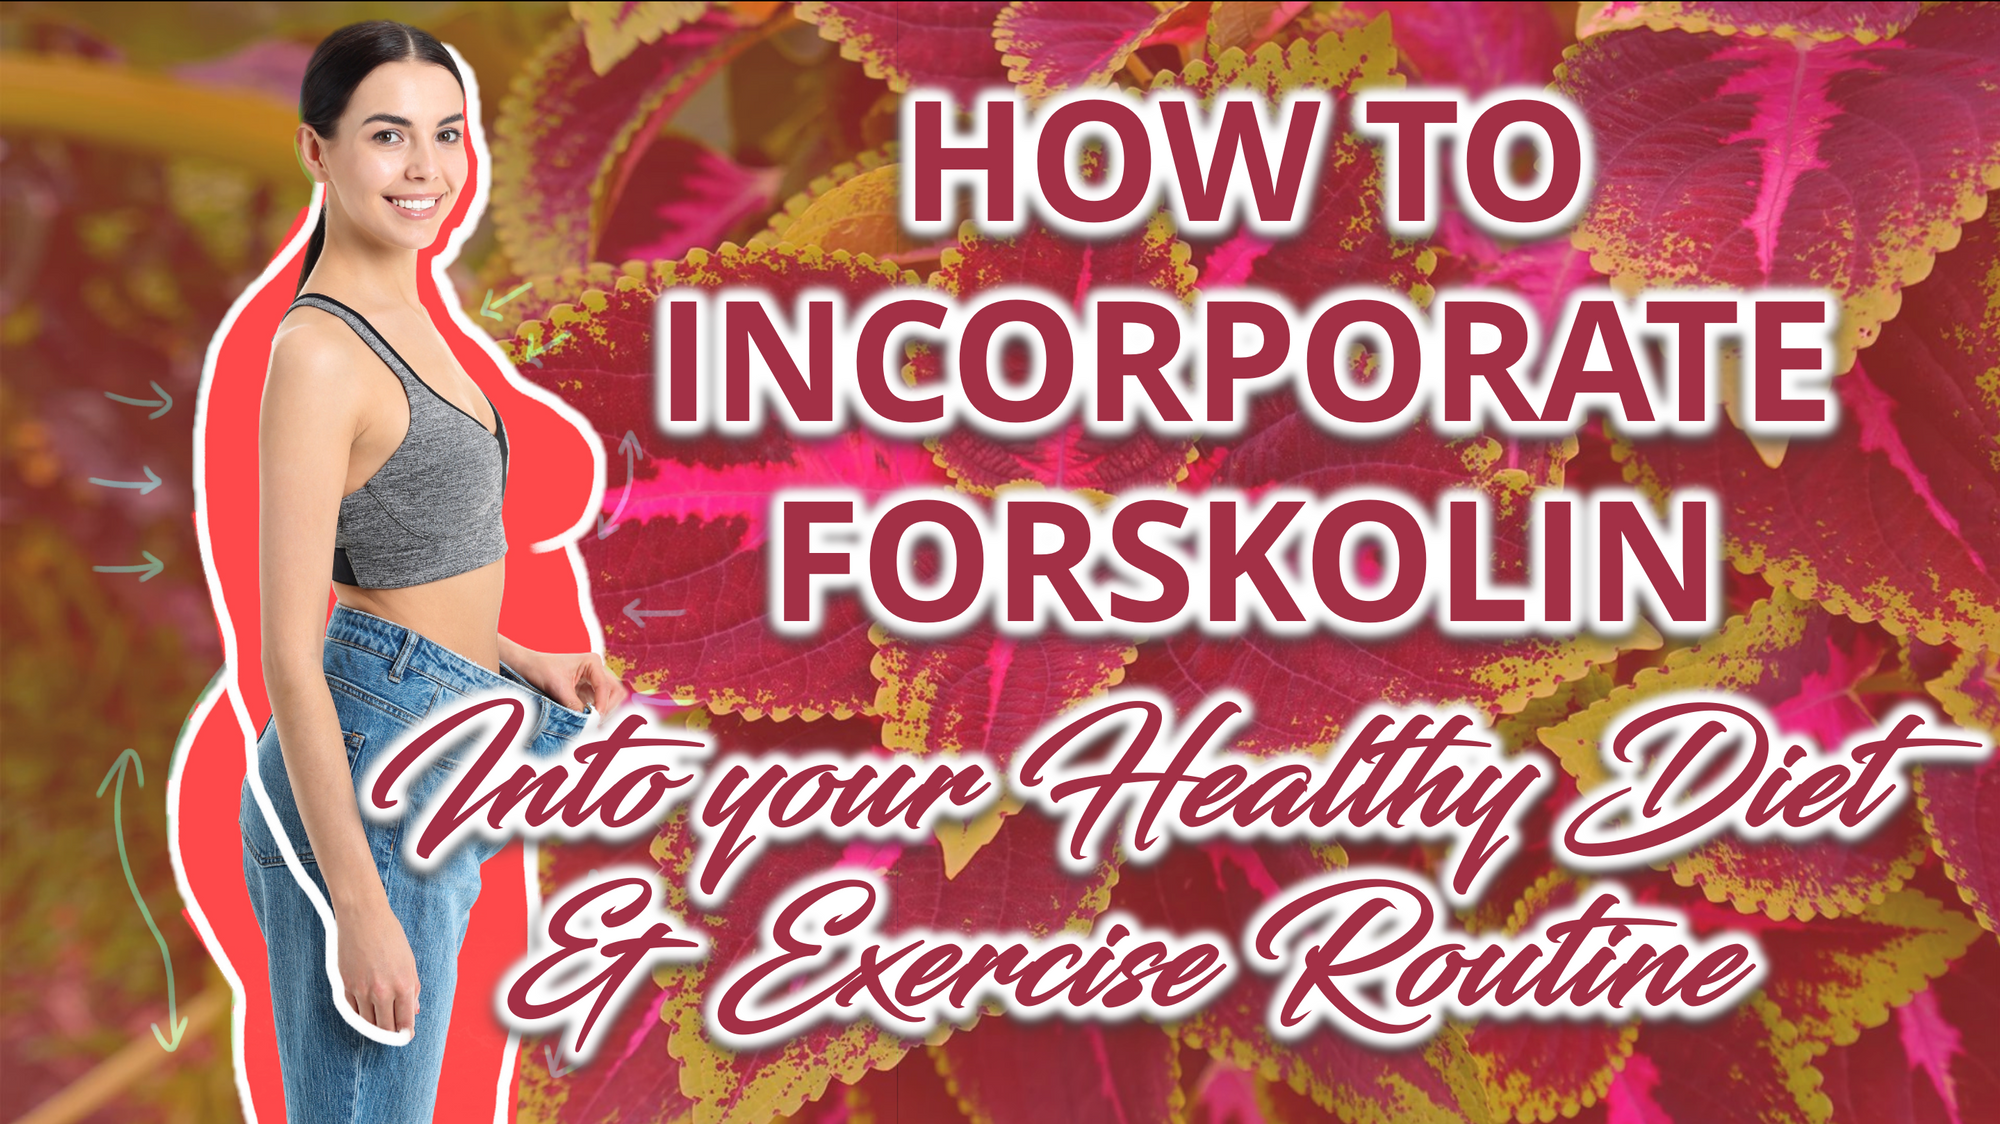 A girl holding her pants showing her smaller waist, with a pink shadow, a Forskolin Background and a Text "How to Incorporate Forskolin Into Your Healthy Diet and Exercise Routine"